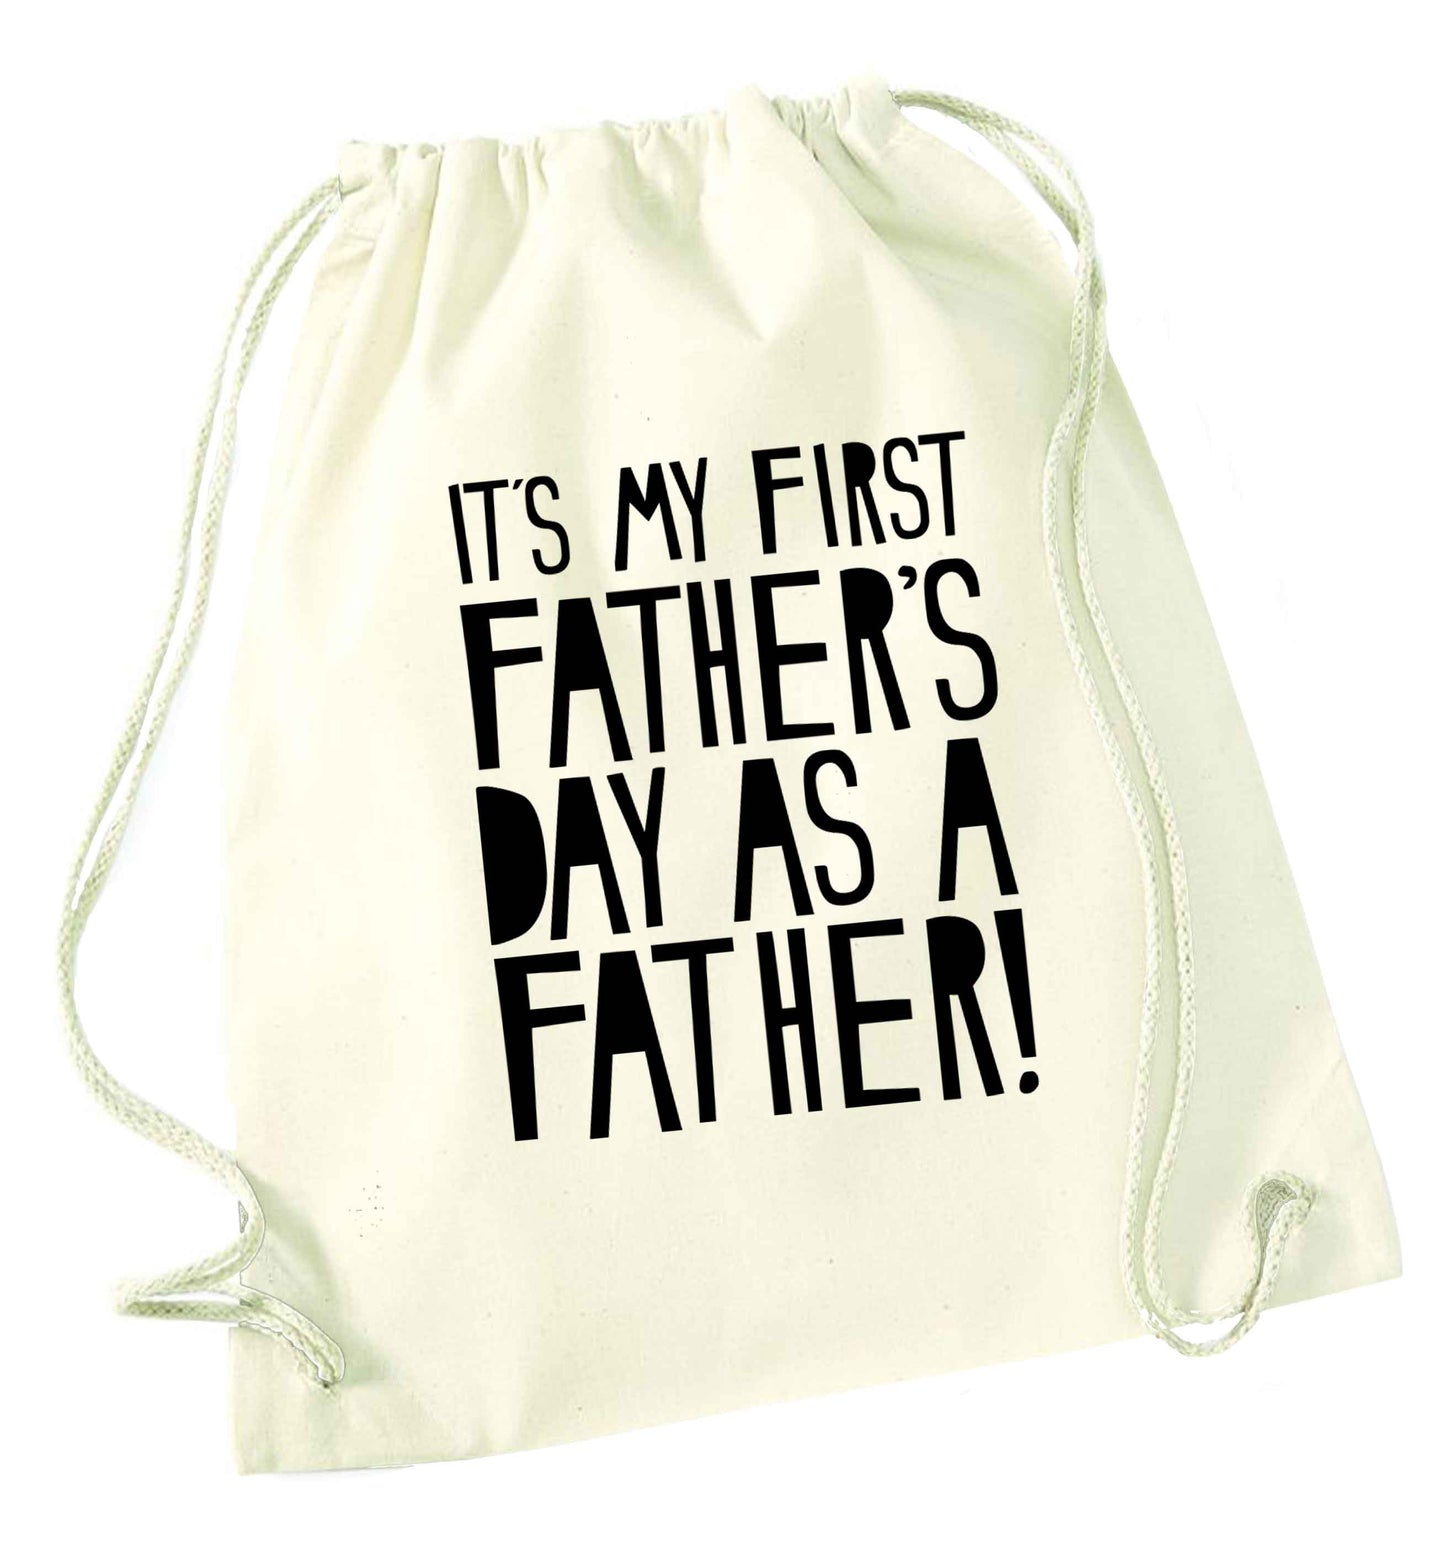 It's my first father's day as a father! natural drawstring bag